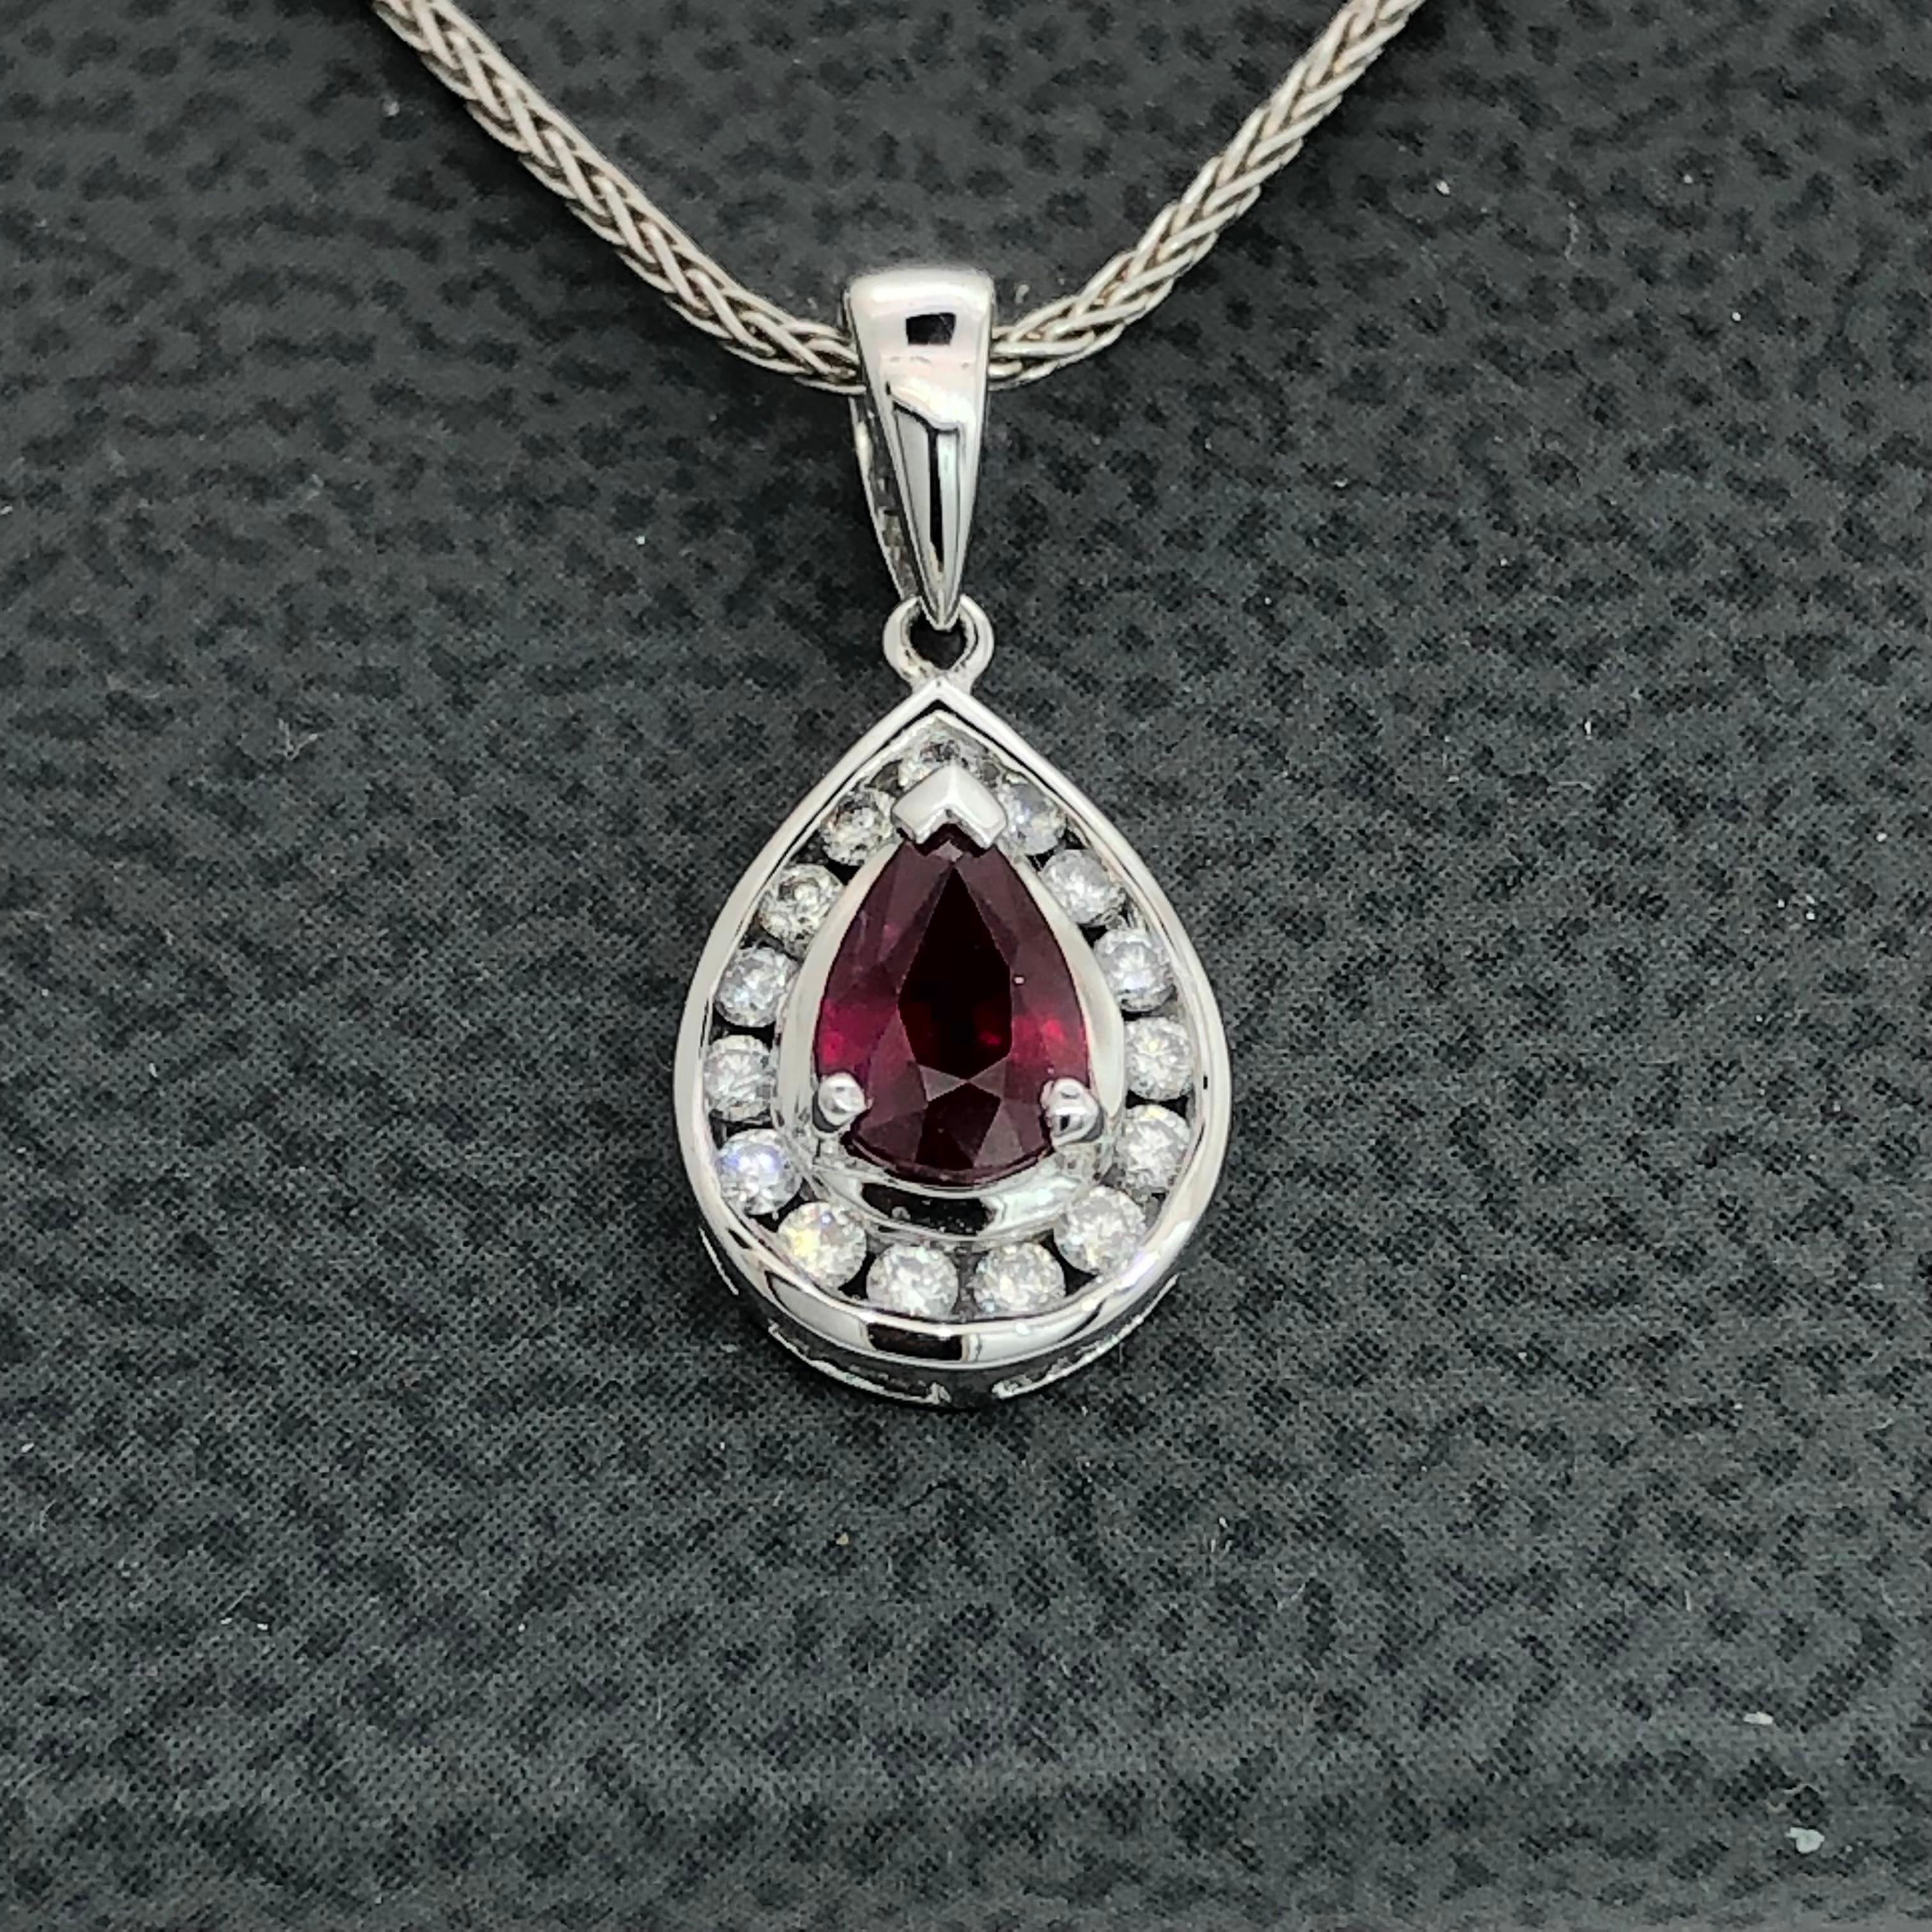 Classic pendant in 18 carat white gold
Set with one pear shape natural Ruby weighing 0.68 carats 
surrounded by 15 channel set Diamons totally weighing 0.18 carats
Pendant length including bail is 19.0 mm
Teardrop dimensions are 12.0 mm x 9.0